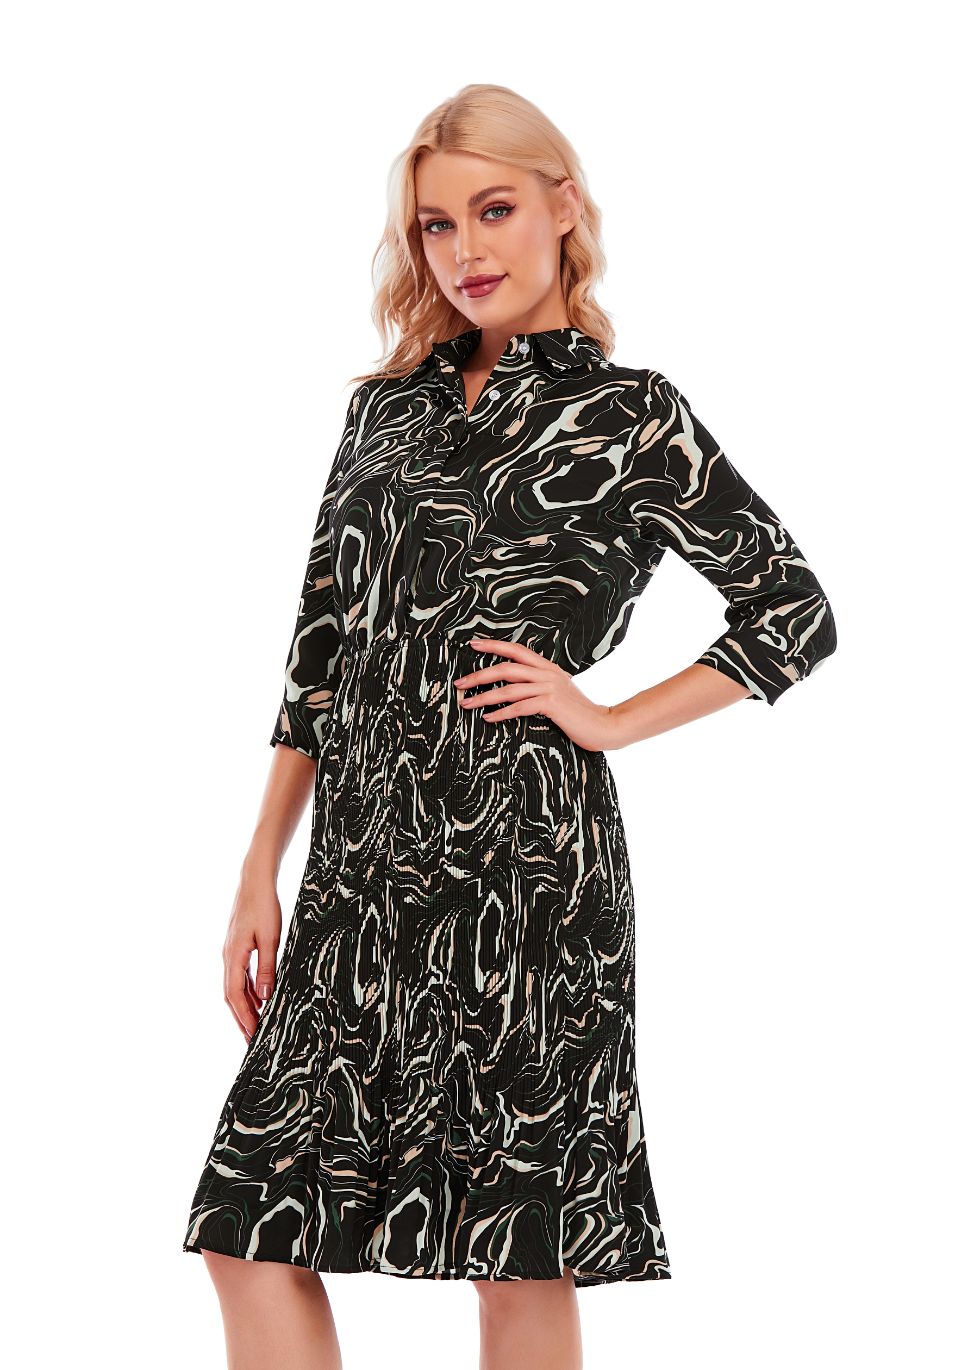 Micro Pleated Skirt Print Dress with 3/4 Sleeve and Button Down Top - seilerlanguageservices